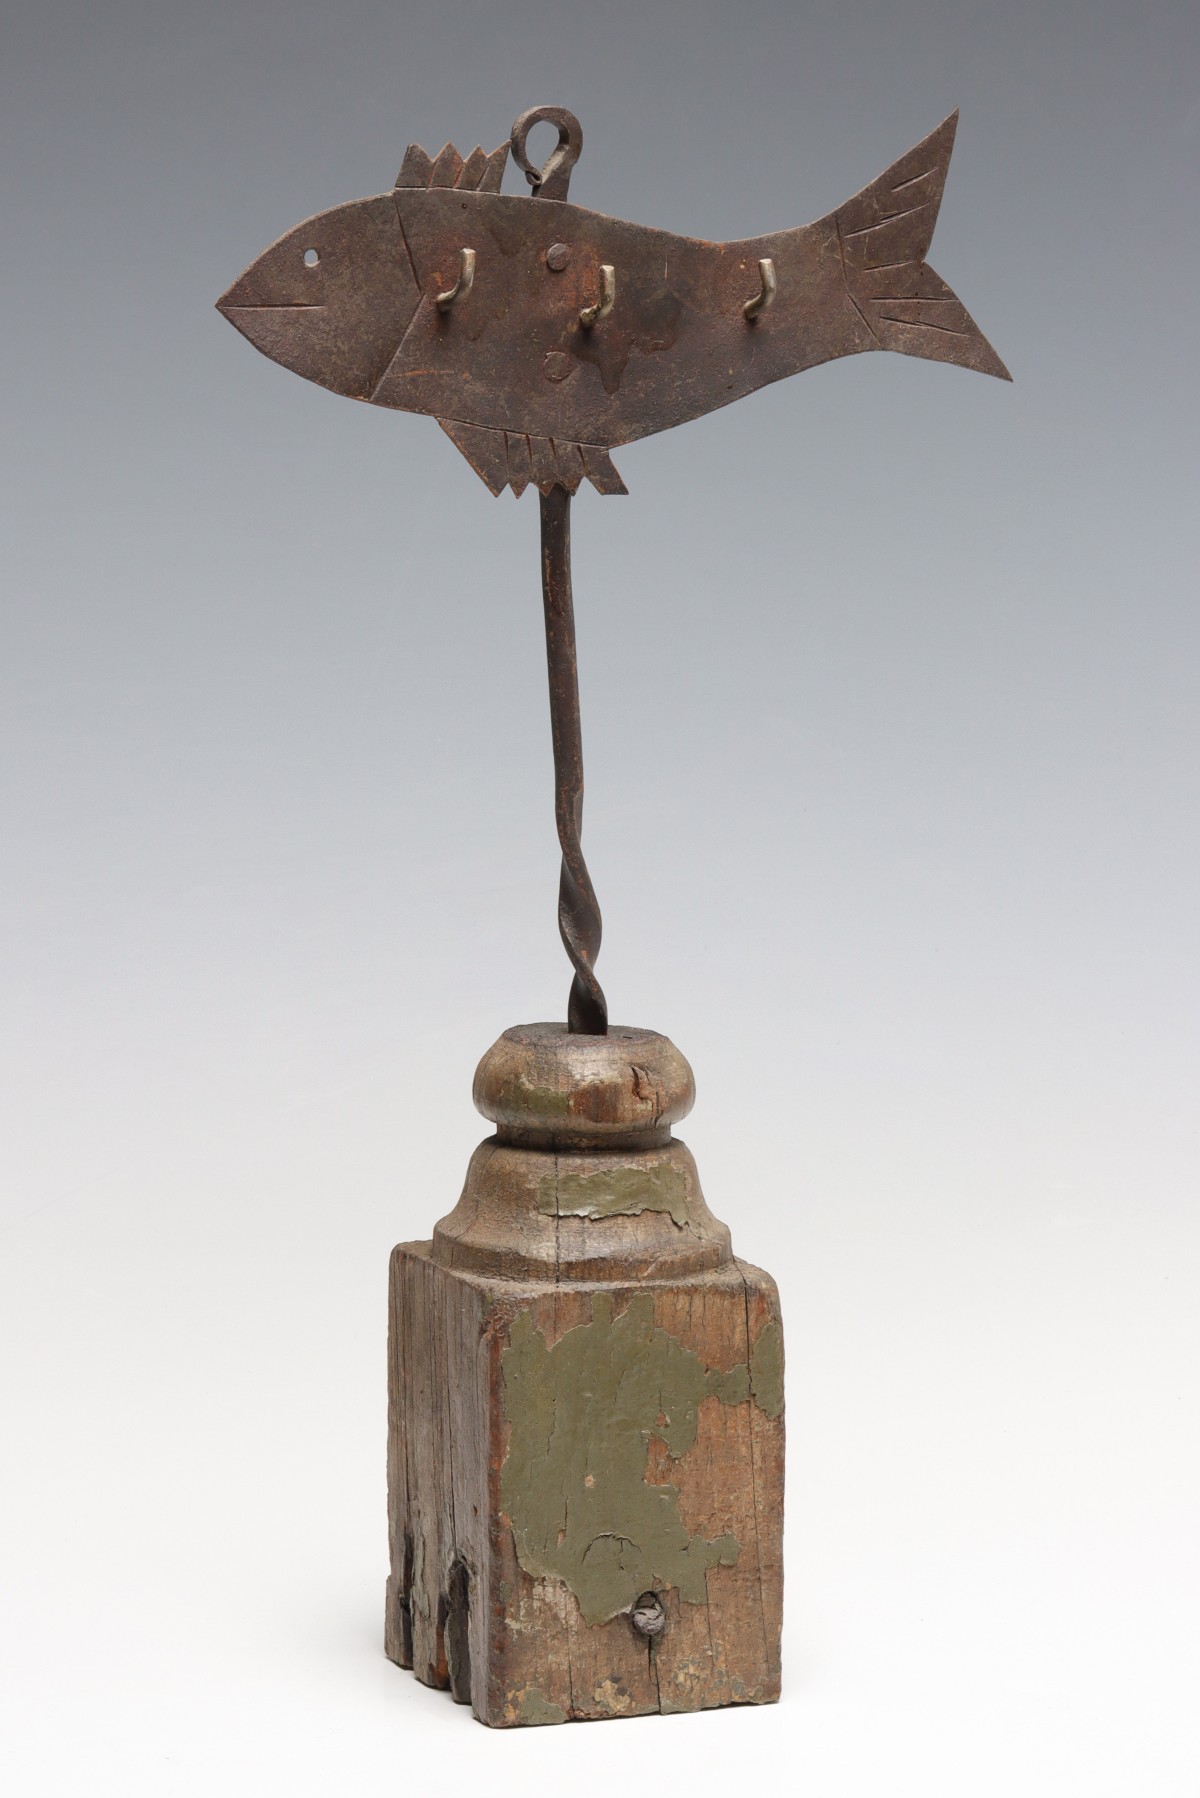 AN EARLY 19TH CENTURY FISH FORM SKEWER HANGER